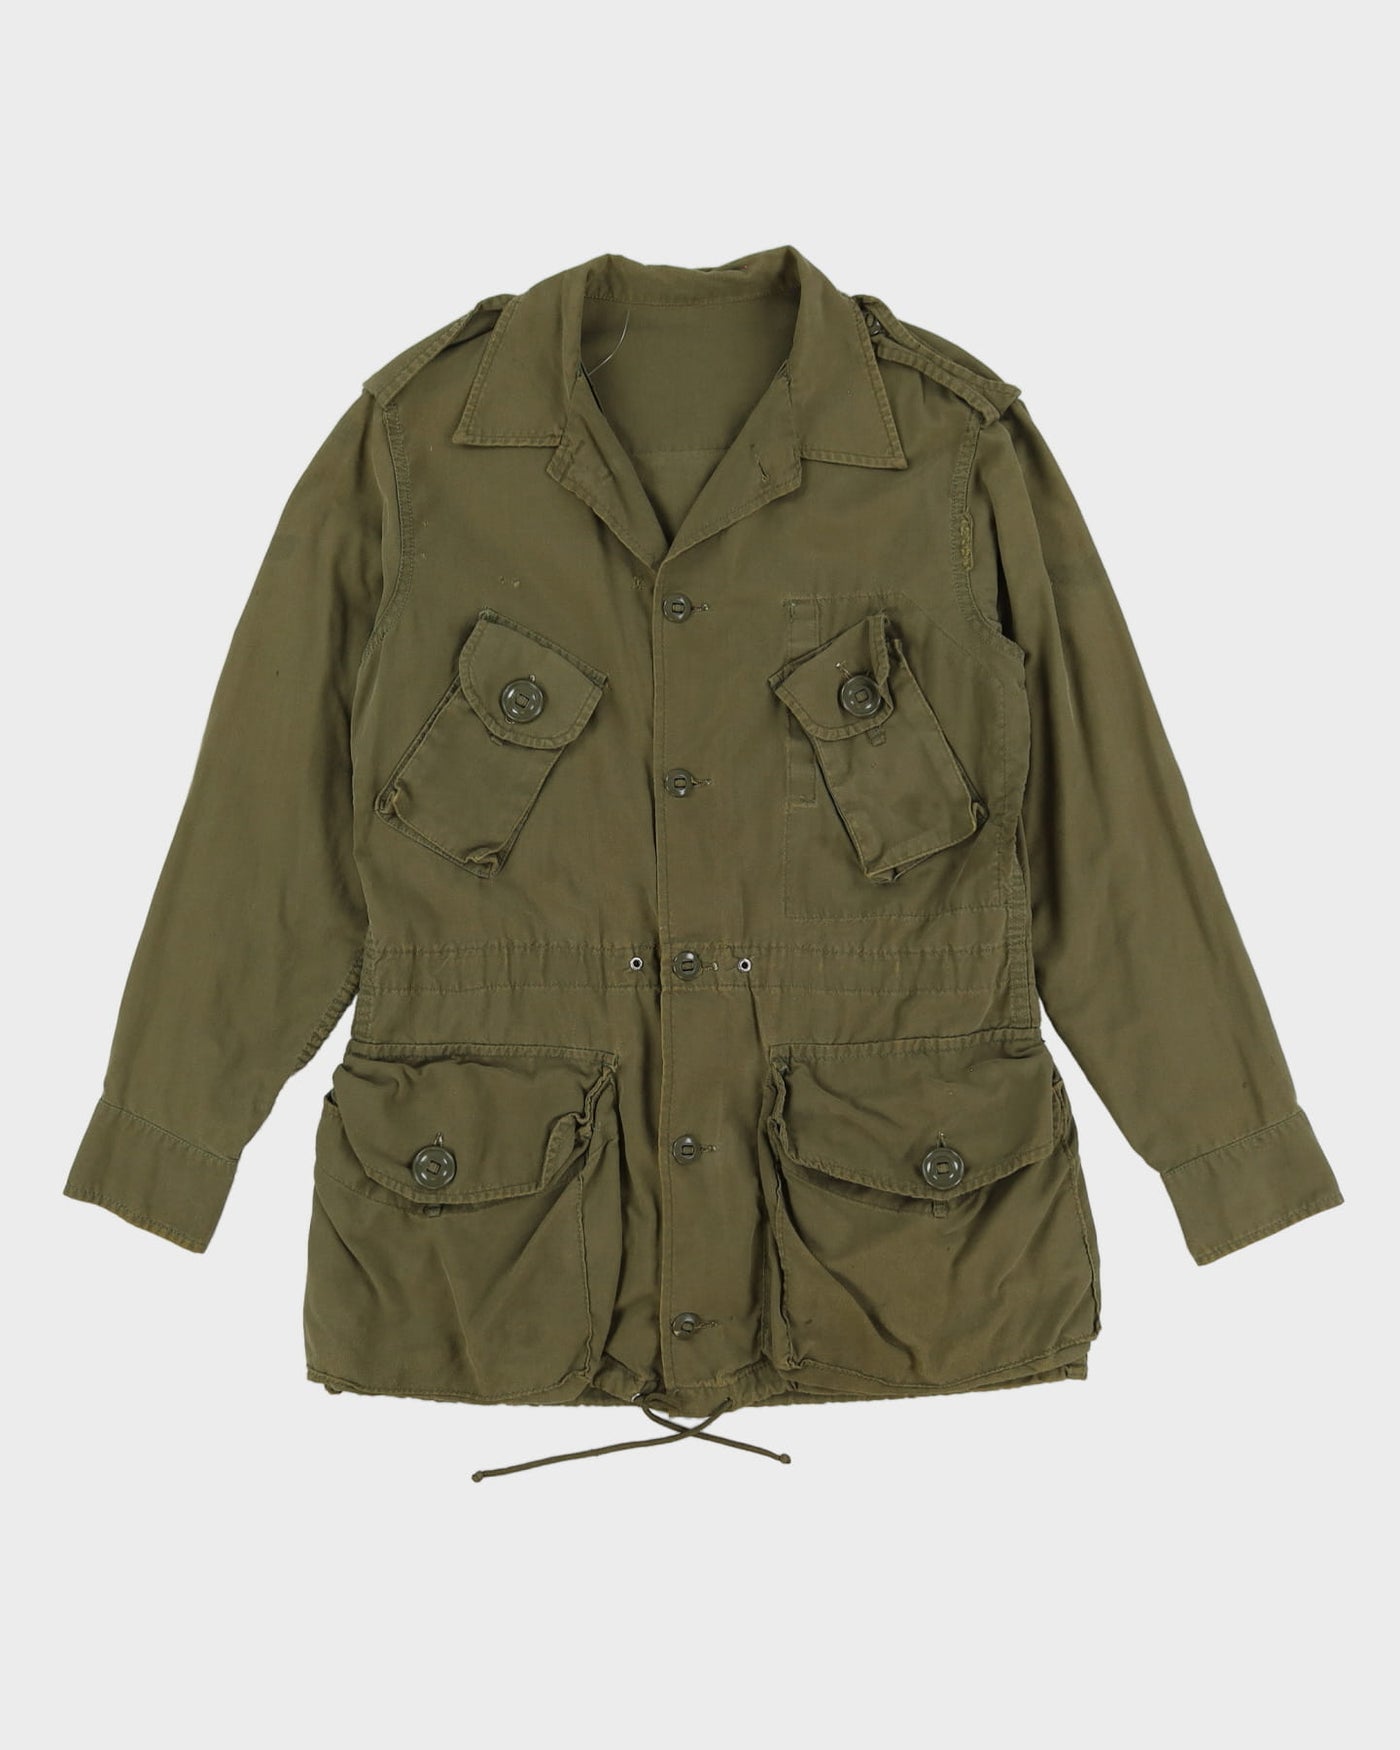 90s Vintage Canadian Army Lightweight Combat Jacket - Small